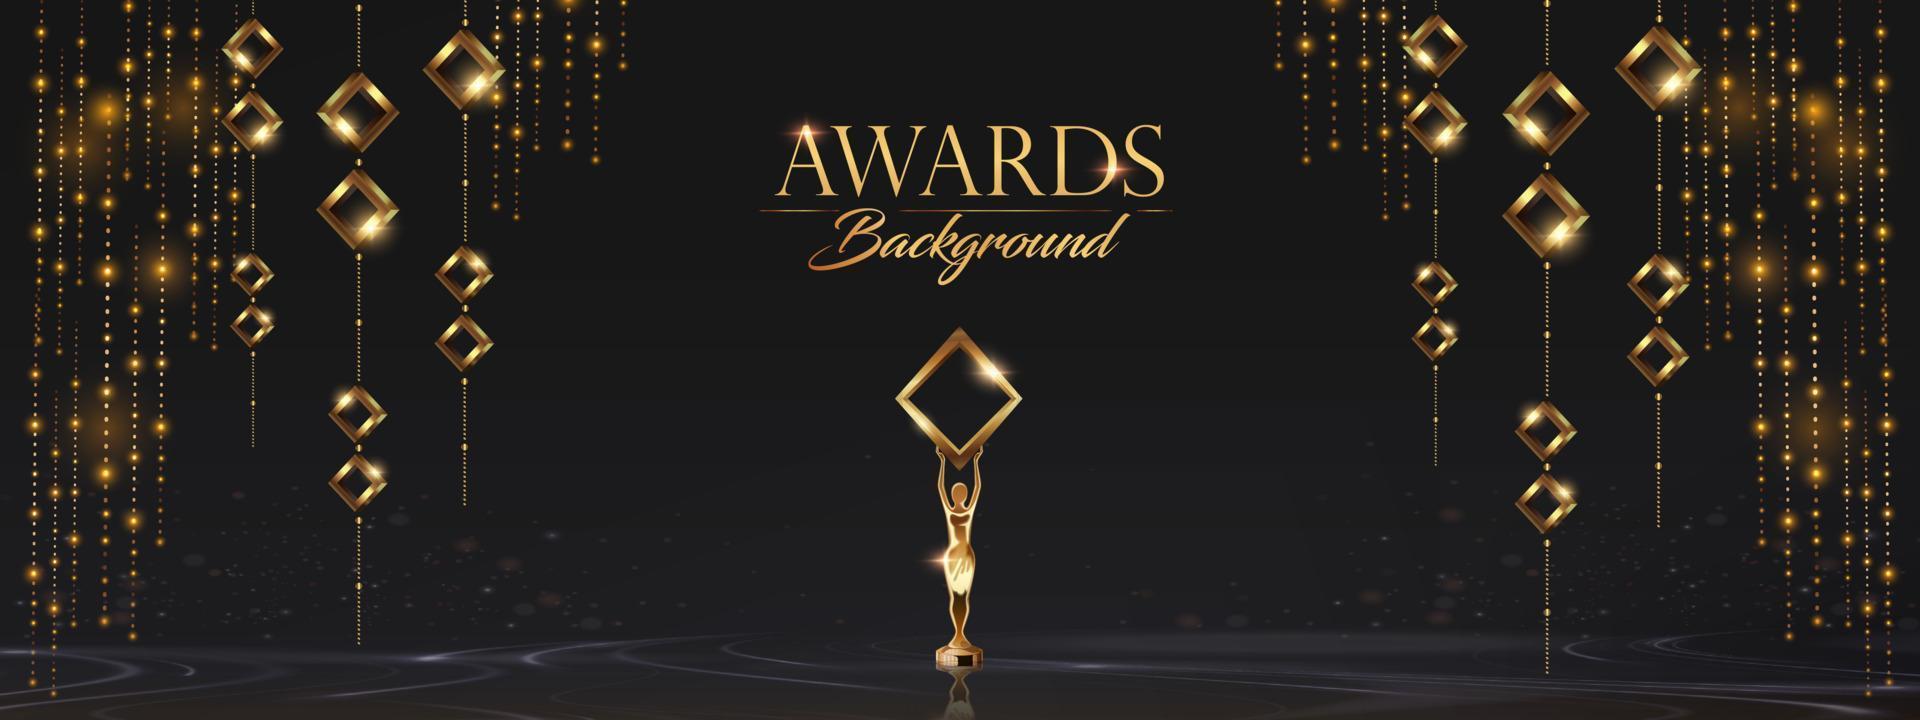 Black and Golden Stage Royal Awards Graphics Background. Lights Elegant Shine Modern Template. Thread Falling Star Particles Corporate Template. Classy speedy lines Abstract trophy Certificate Banner. vector